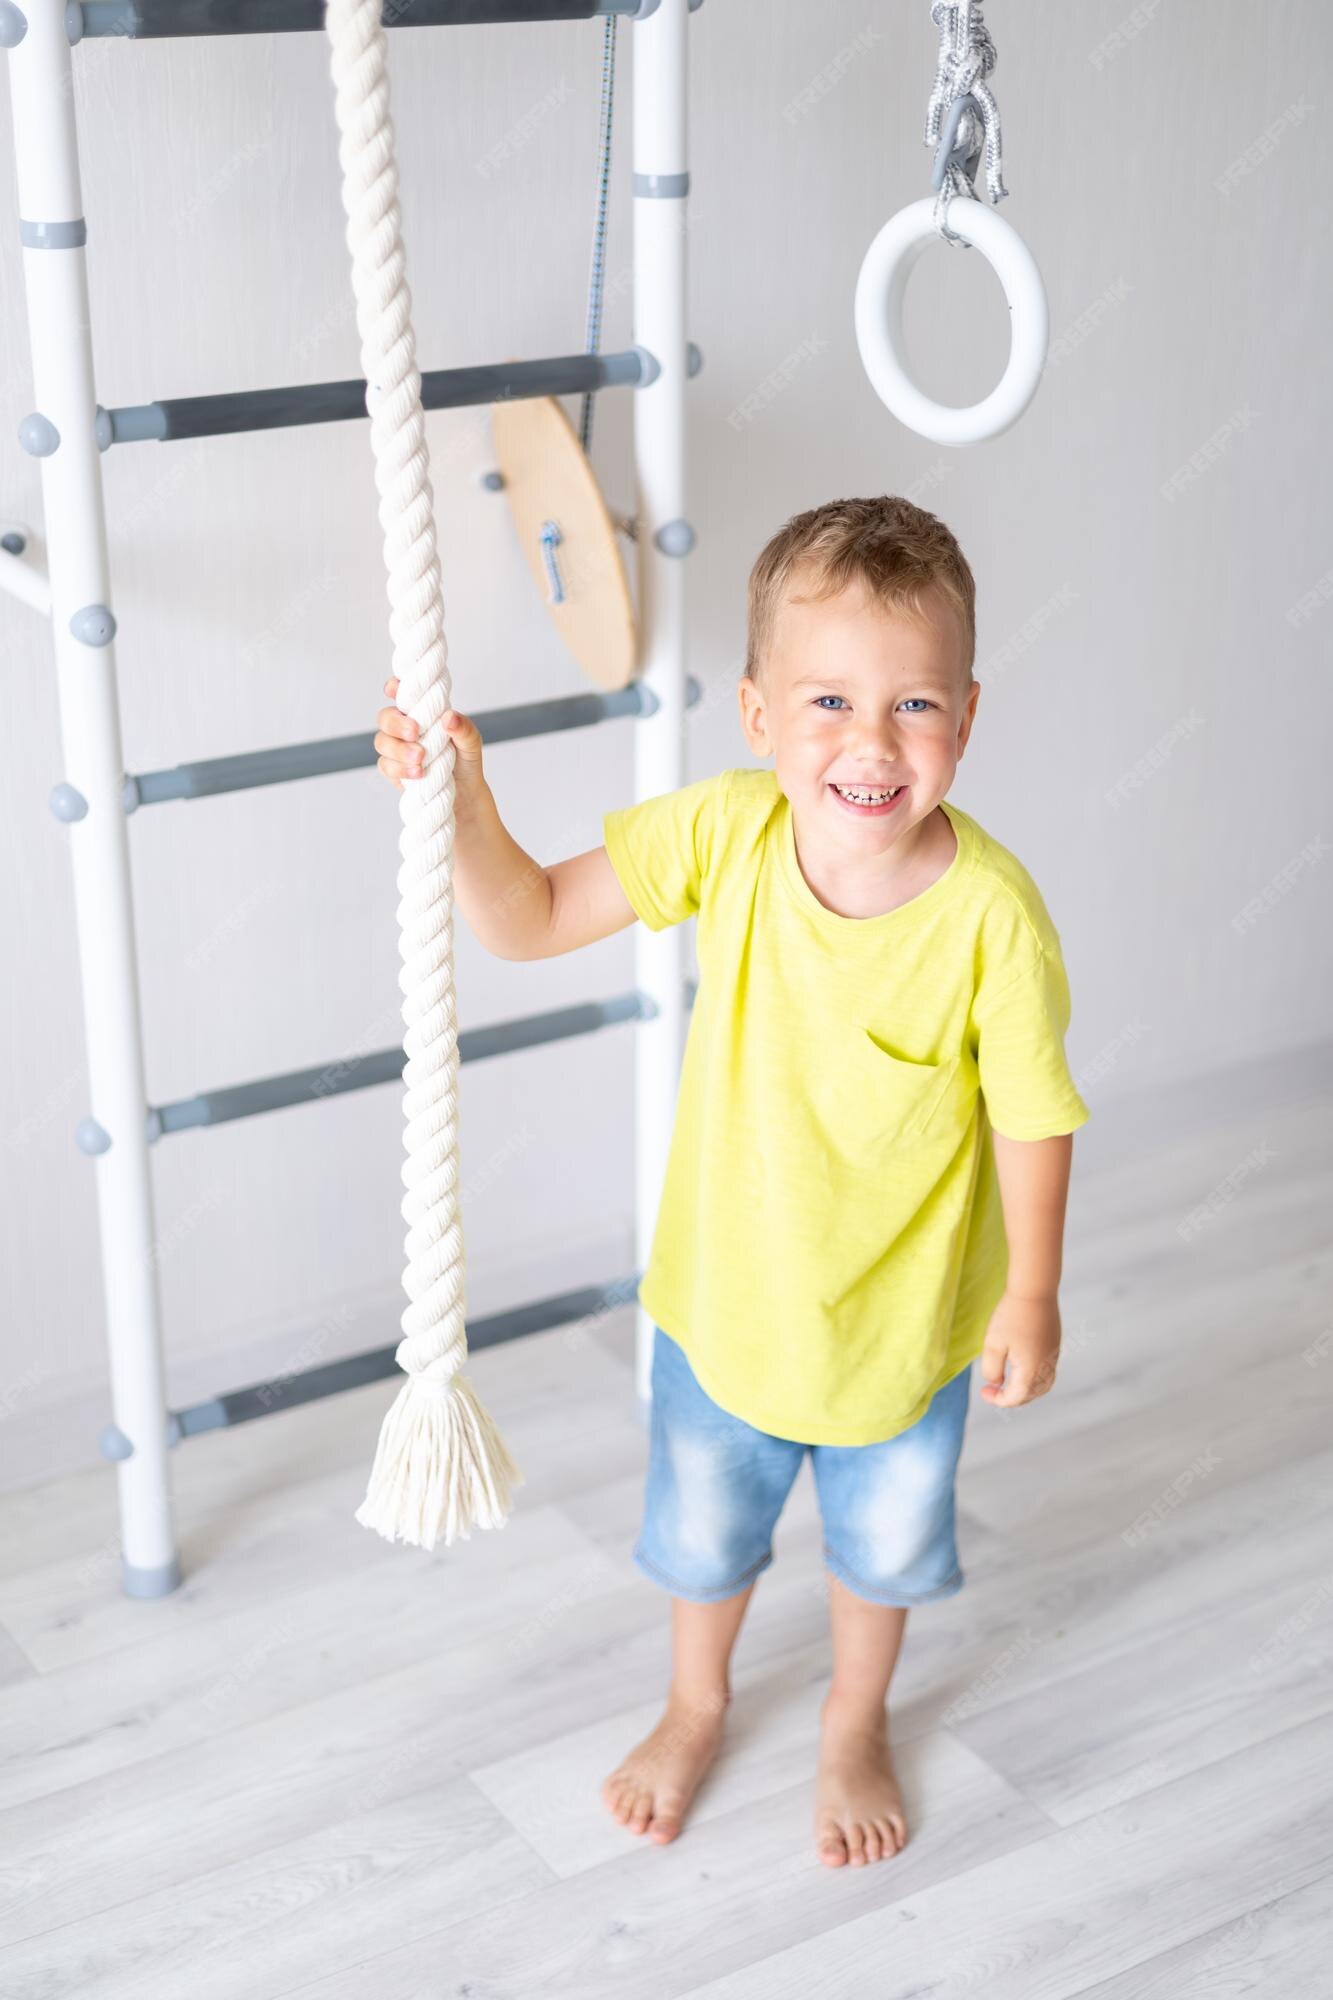 Premium Photo  Happy healthy baby boy does sports on the swedish wall of  the house healthy lifestyle sports at home children's sports complex ladder